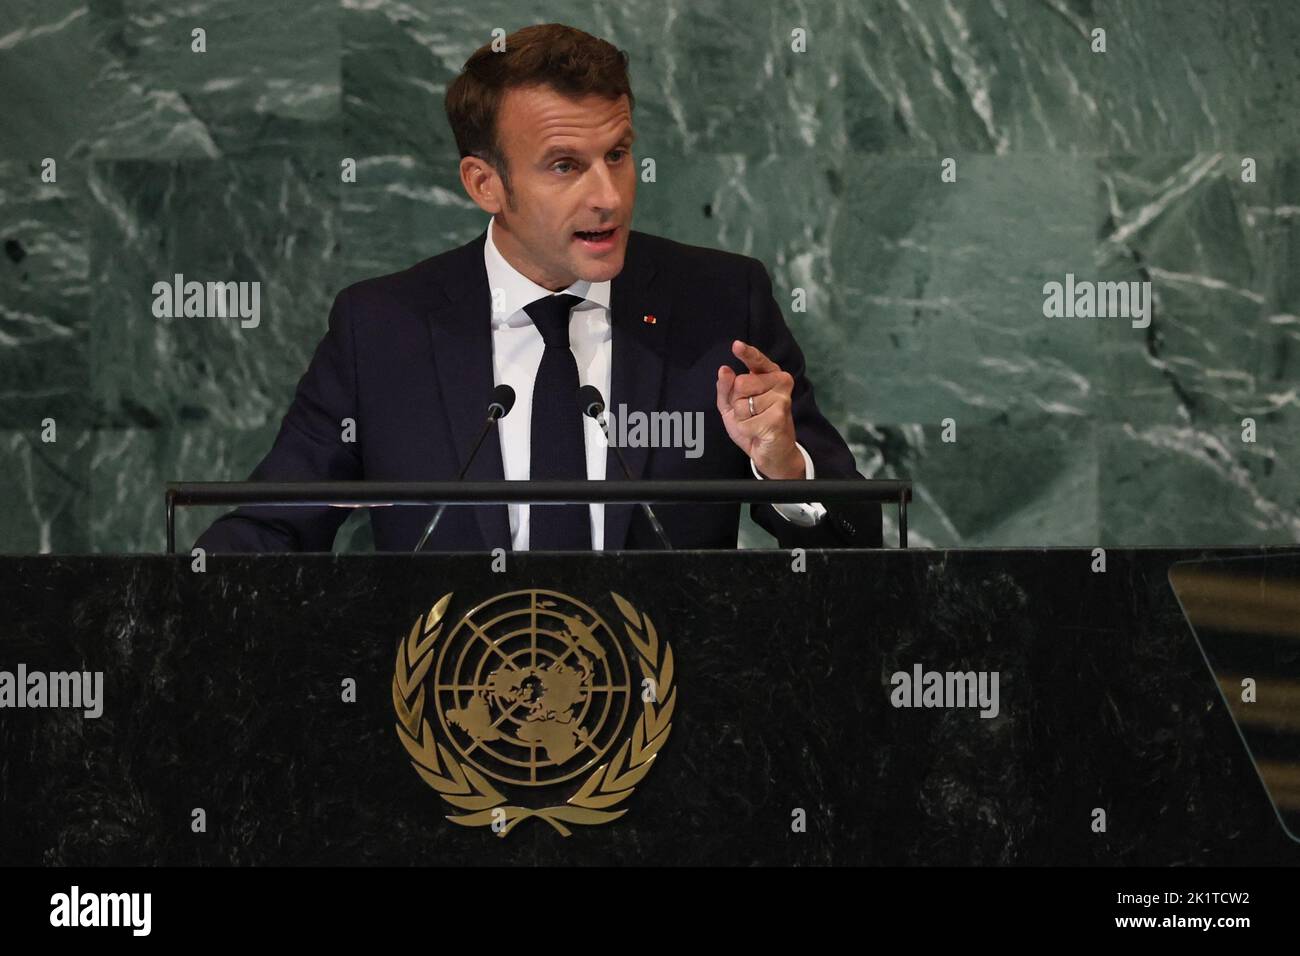 France's President Emmanuel Macron addresses the 77th Session of the United Nations General Assembly at U.N. Headquarters in New York City, U.S., September 20, 2022. REUTERS/Brendan McDermid Stock Photo